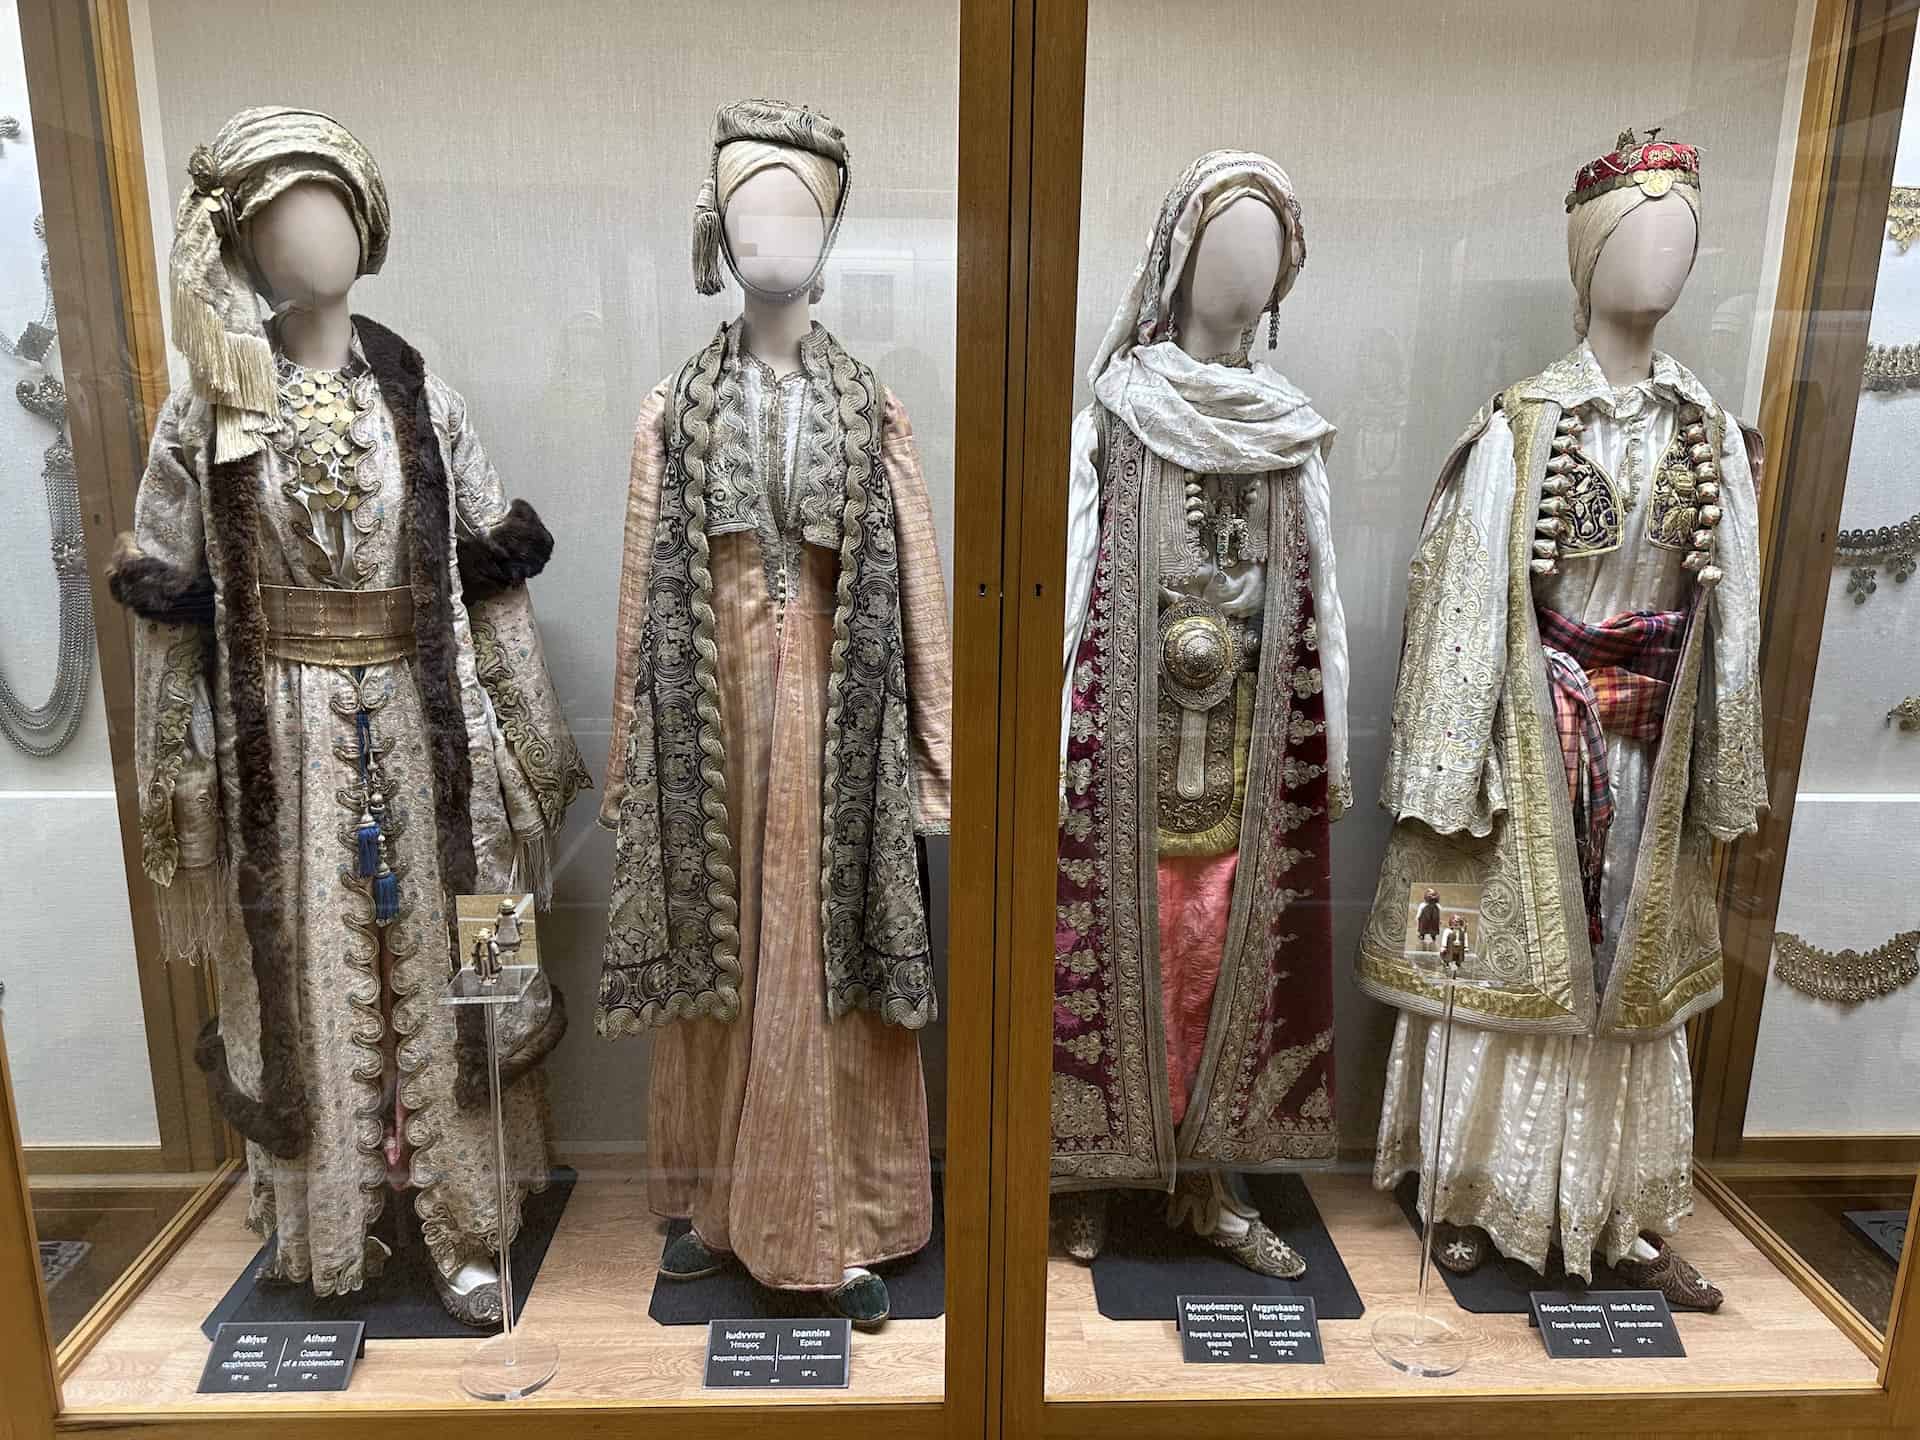 Costume of a noblewoman from Athens, 18th century (left); costume of a noblewoman from Ioannina, 18th century (center left); bridal and festive costume from Argyrokastro, 18th century (center right); and festive costume from North Epirus, 19th century (right) at the National Historical Museum in Athens, Greece